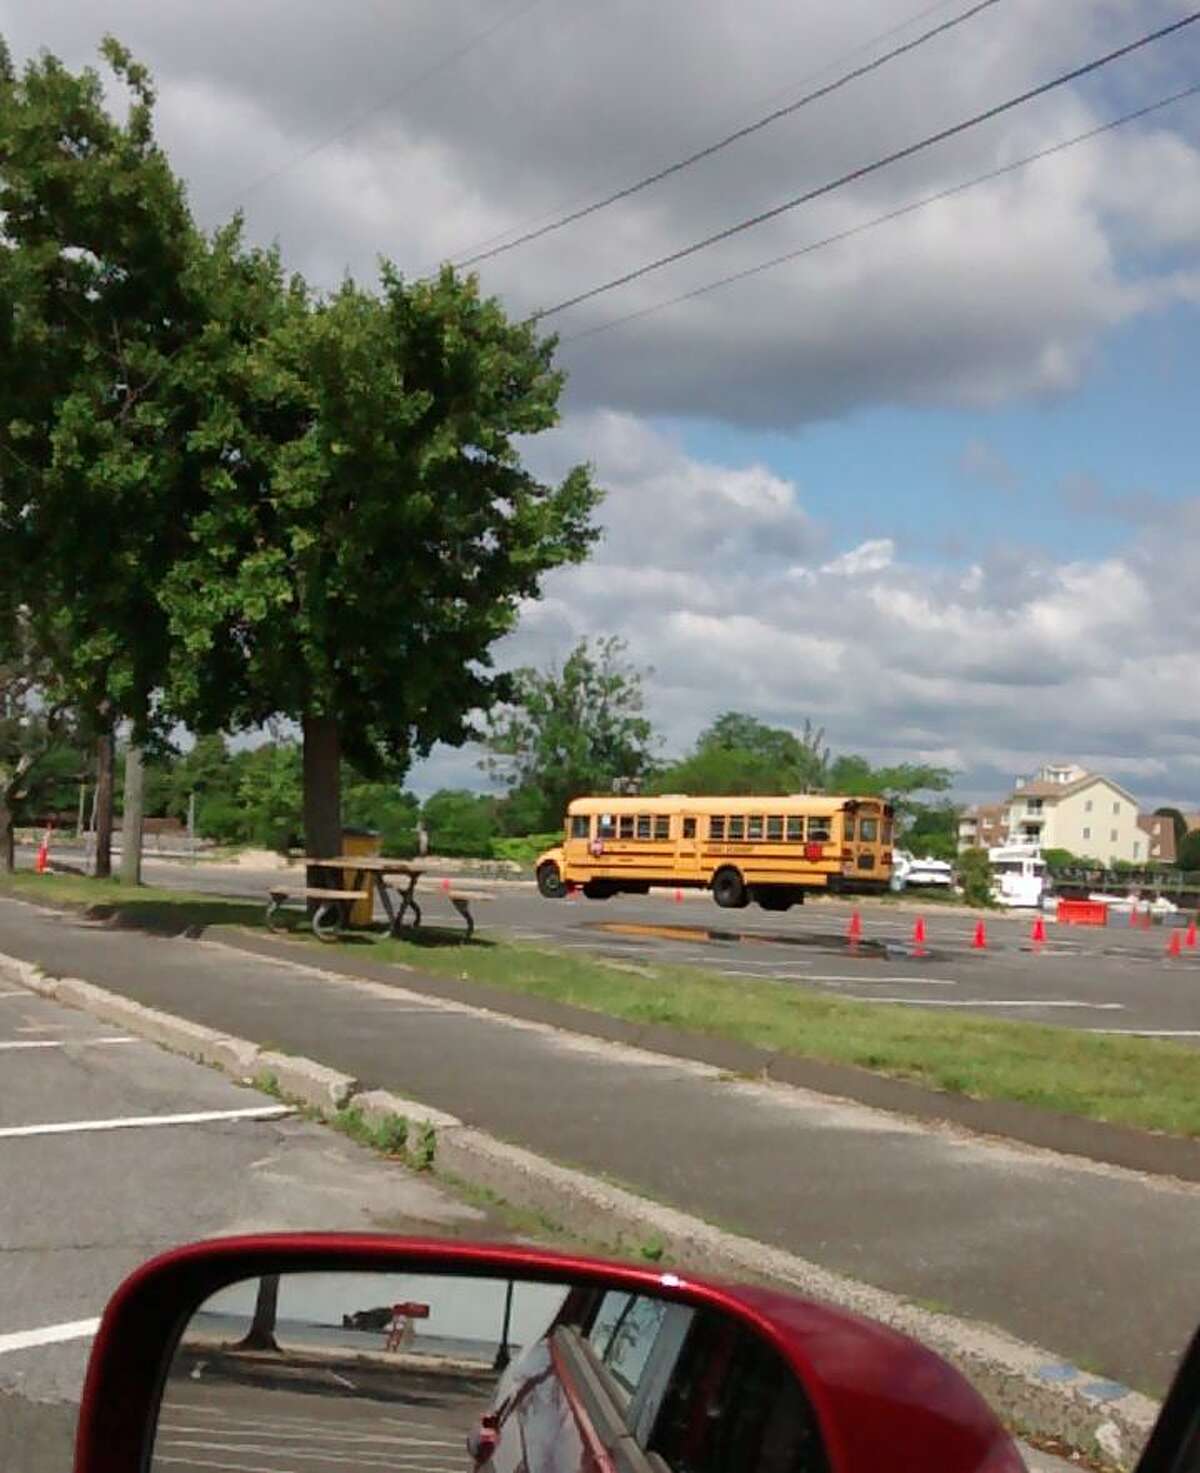 A school bus in the parking lot at Cummings Beach.